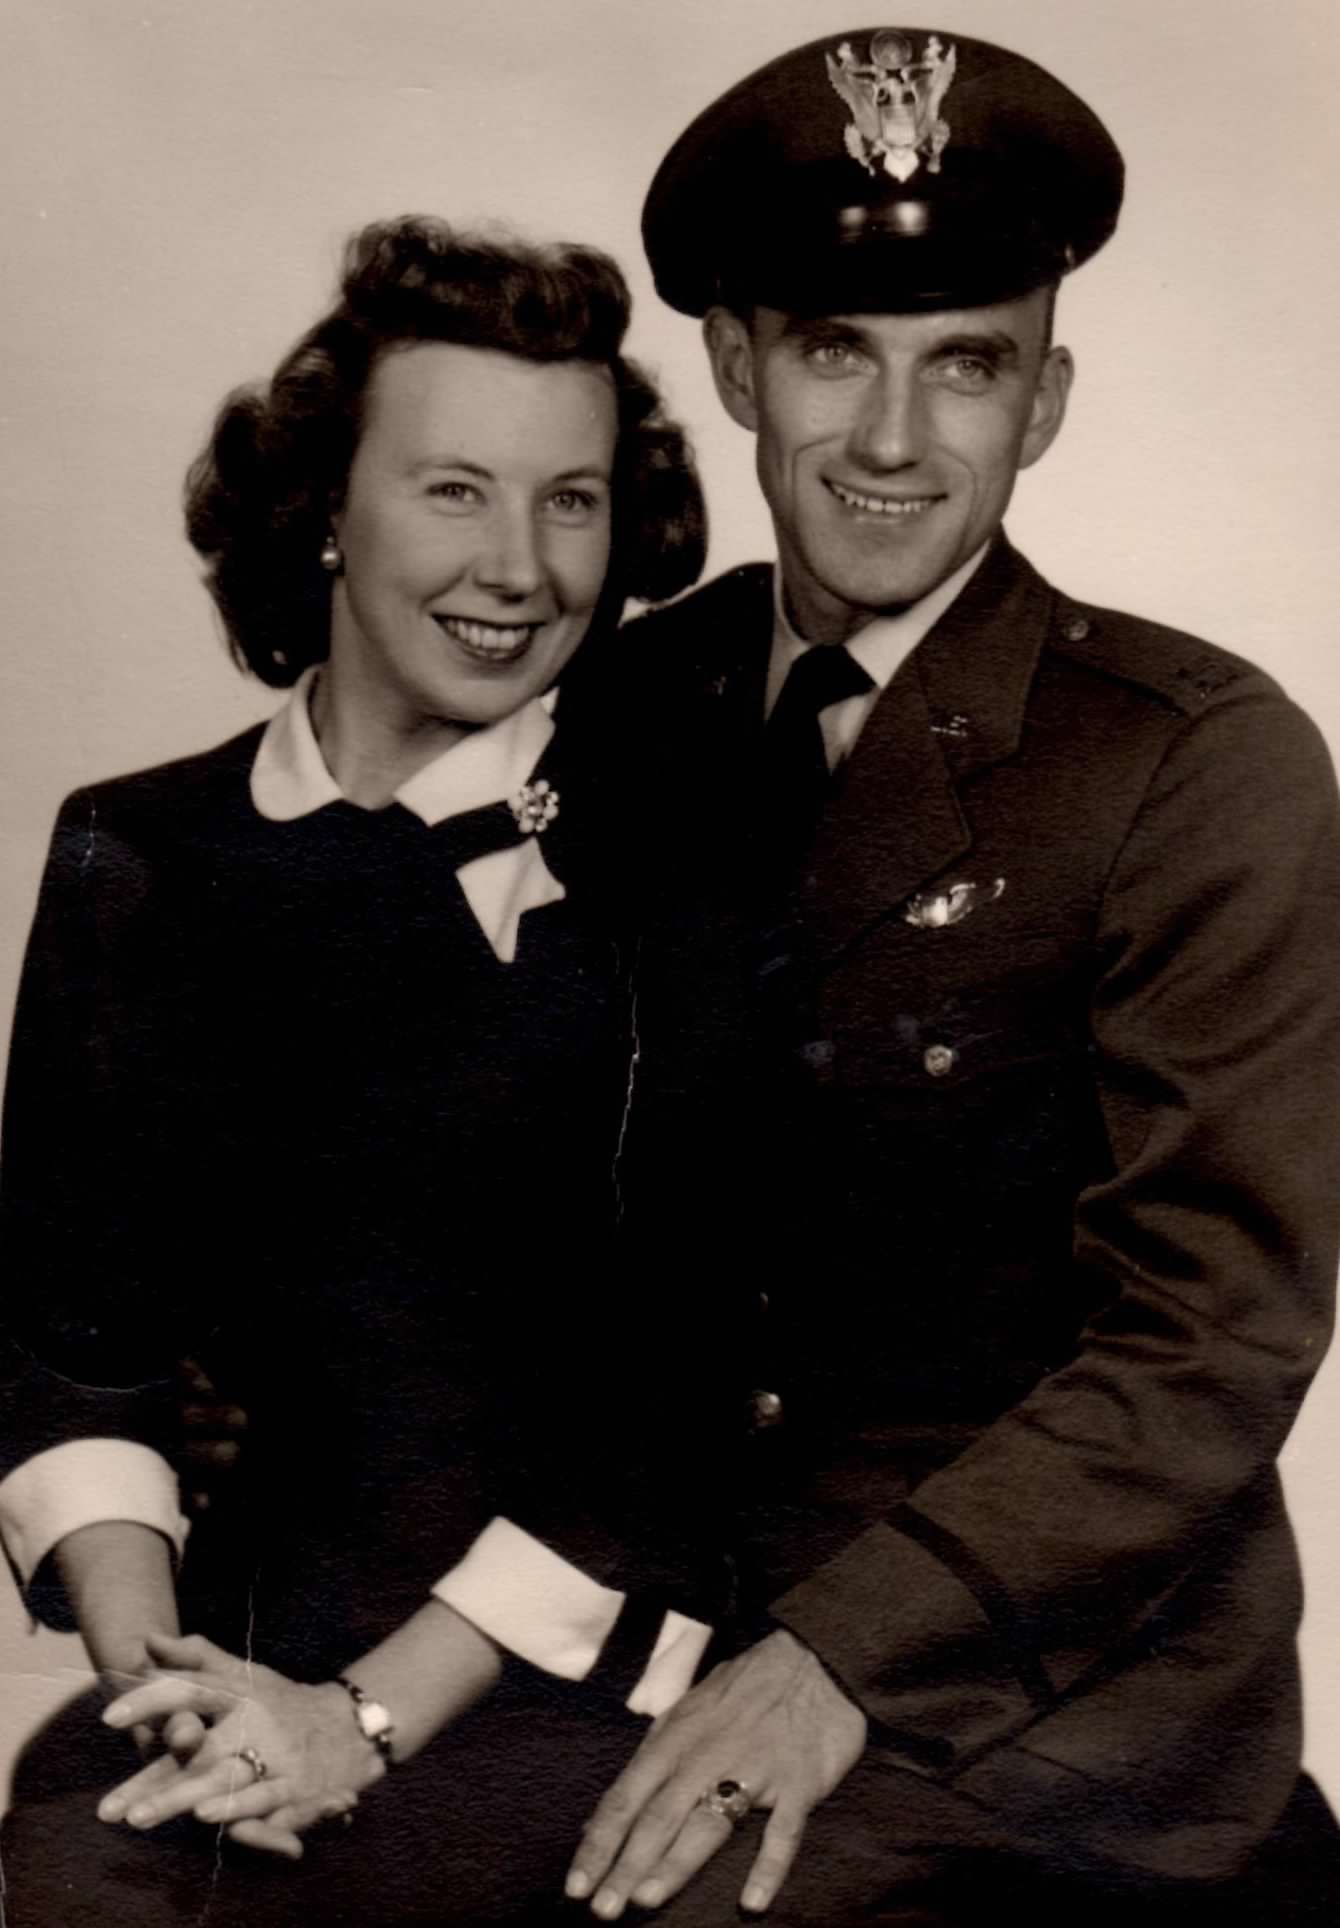 Capt. Rew with his wife, Marie, in 1953 at Hunter AFB, Georgia.
